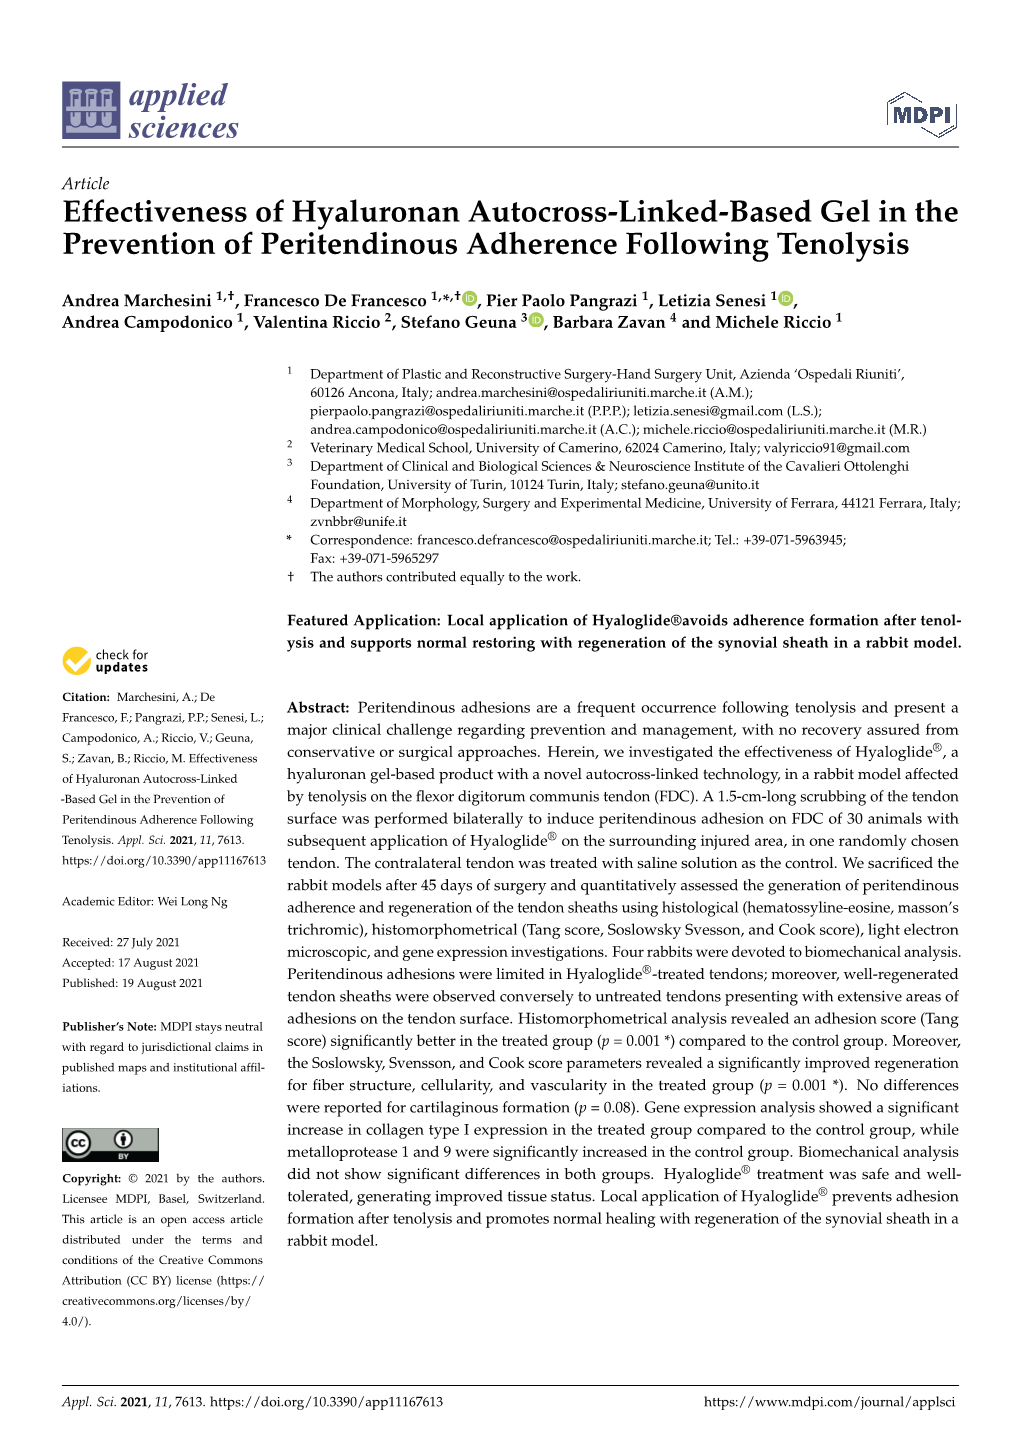 Effectiveness of Hyaluronan Autocross-Linked-Based Gel in the Prevention of Peritendinous Adherence Following Tenolysis